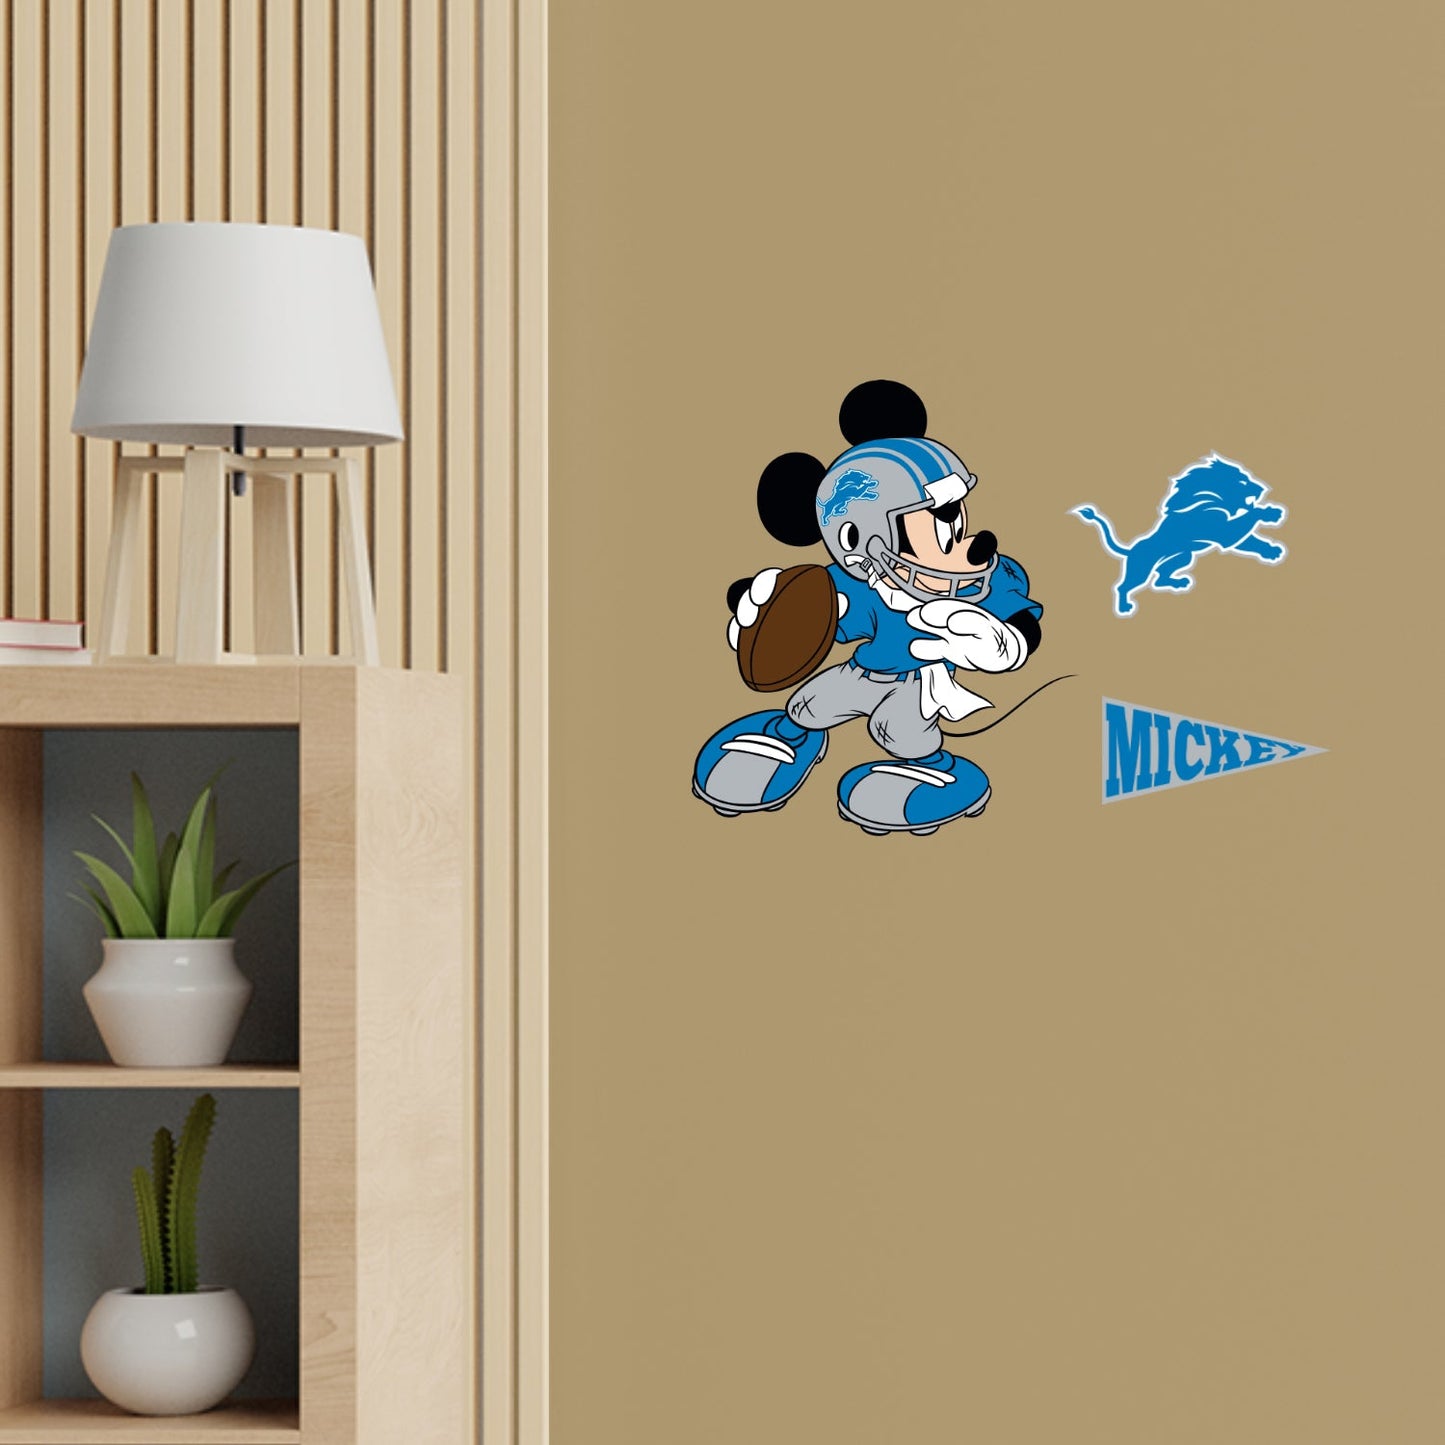 Detroit Lions: Mickey Mouse - Officially Licensed NFL Removable Adhesive Decal